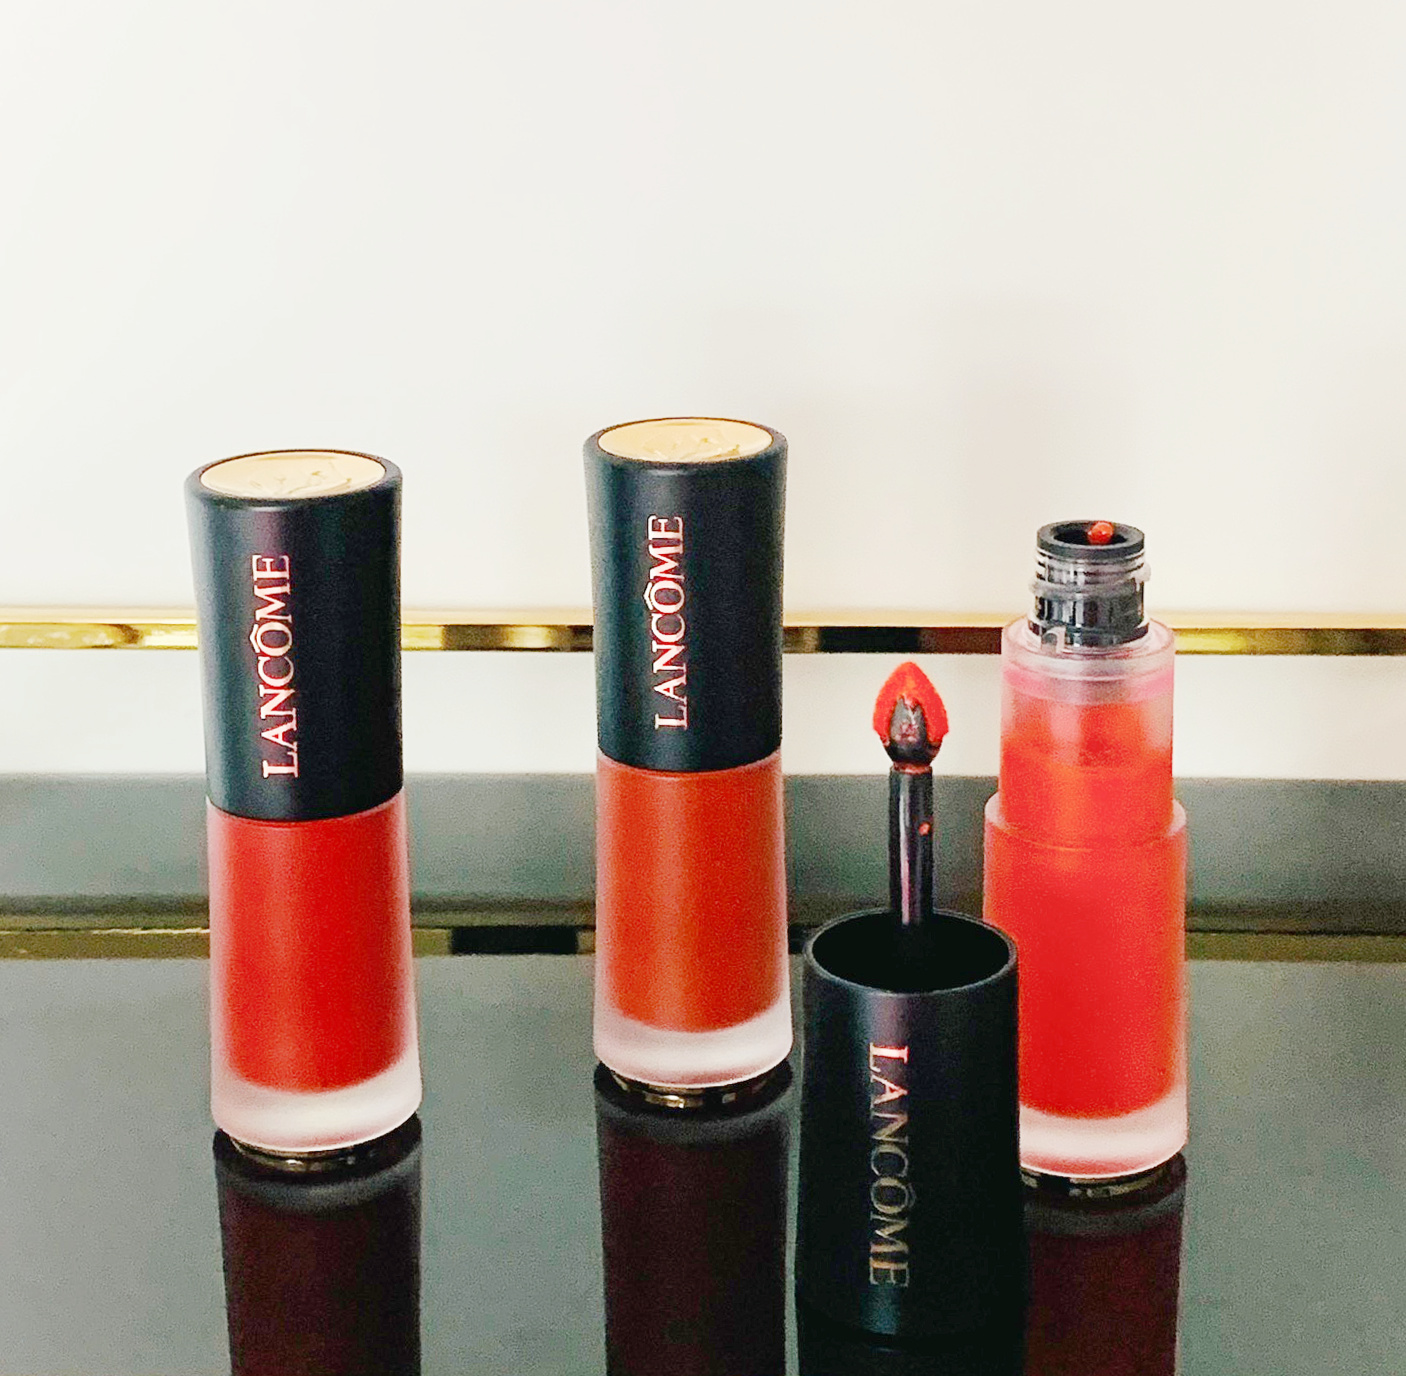 Lancôme L'Absolu Rouge Drama Ink Review & Swatches